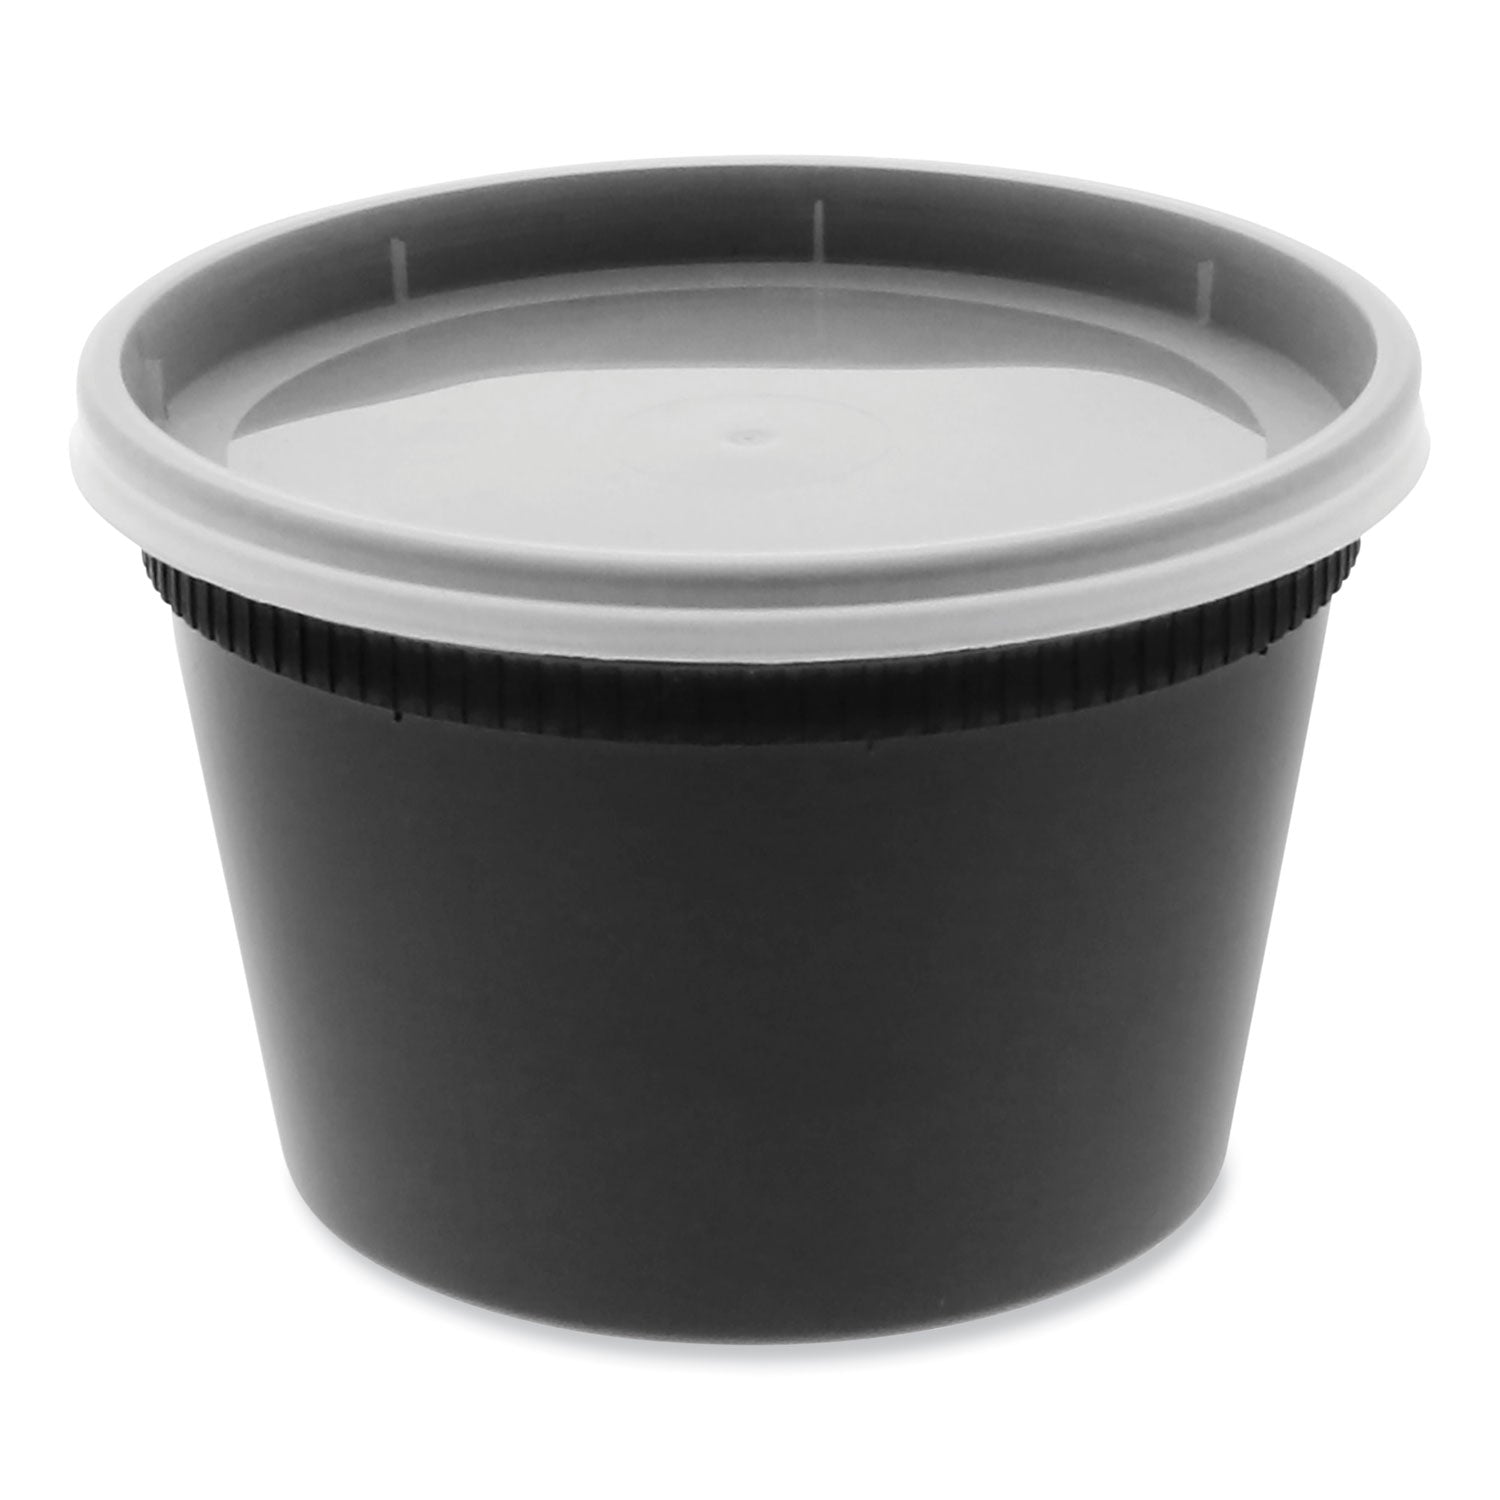 newspring-delitainer-microwavable-container-16-oz-455-x-455-x-31-black-clear-plastic-240-carton_pctysd2516b - 1